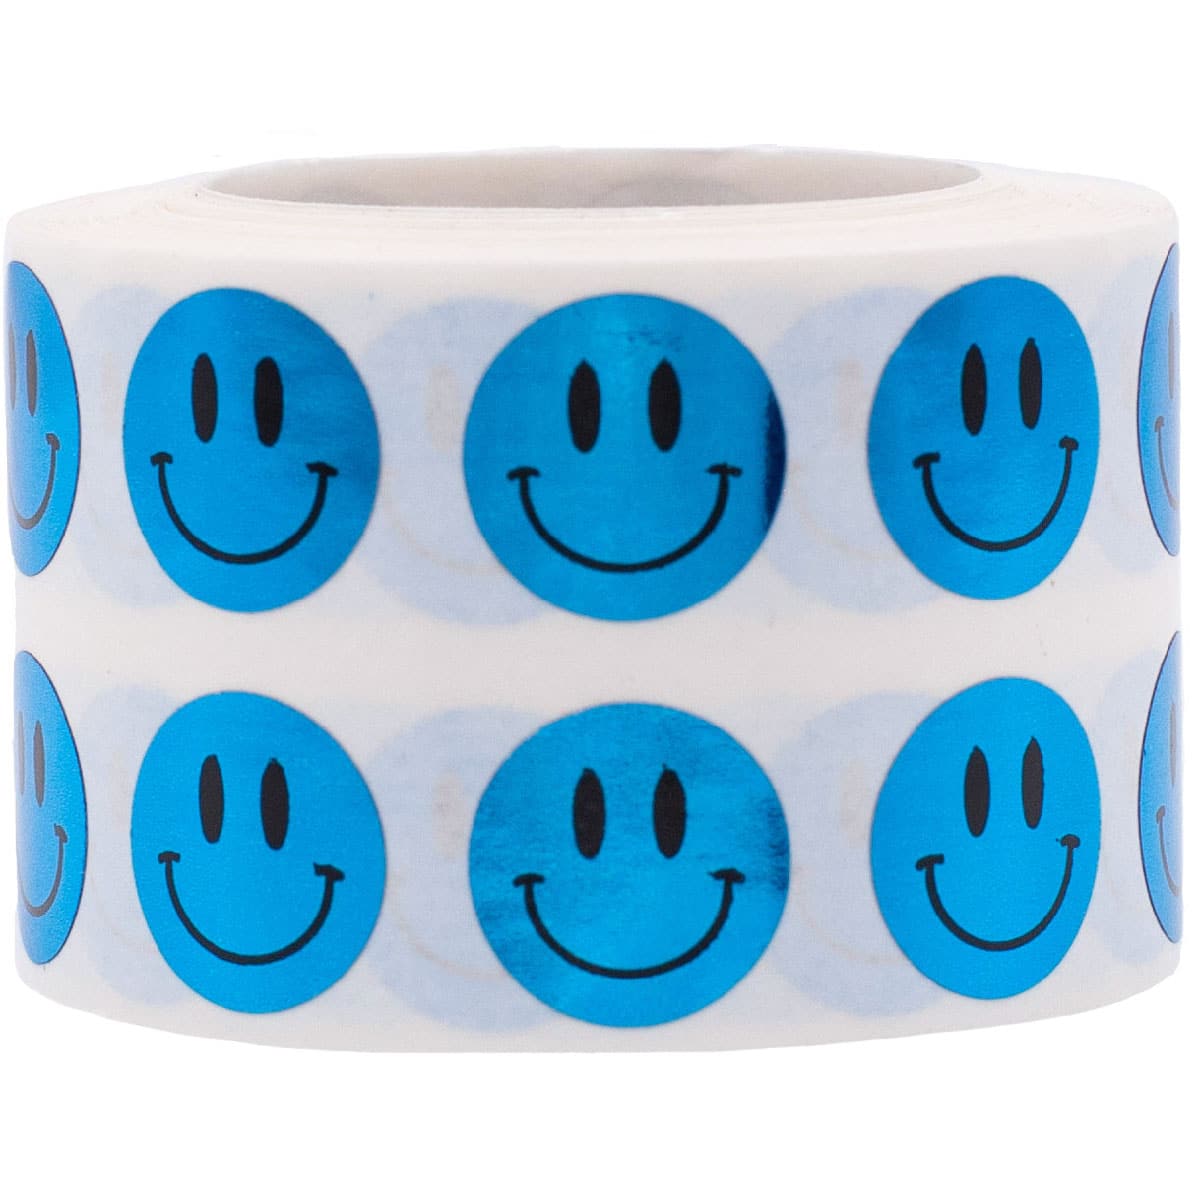 Small Metallic Blue Smiley Face Stickers 1/2